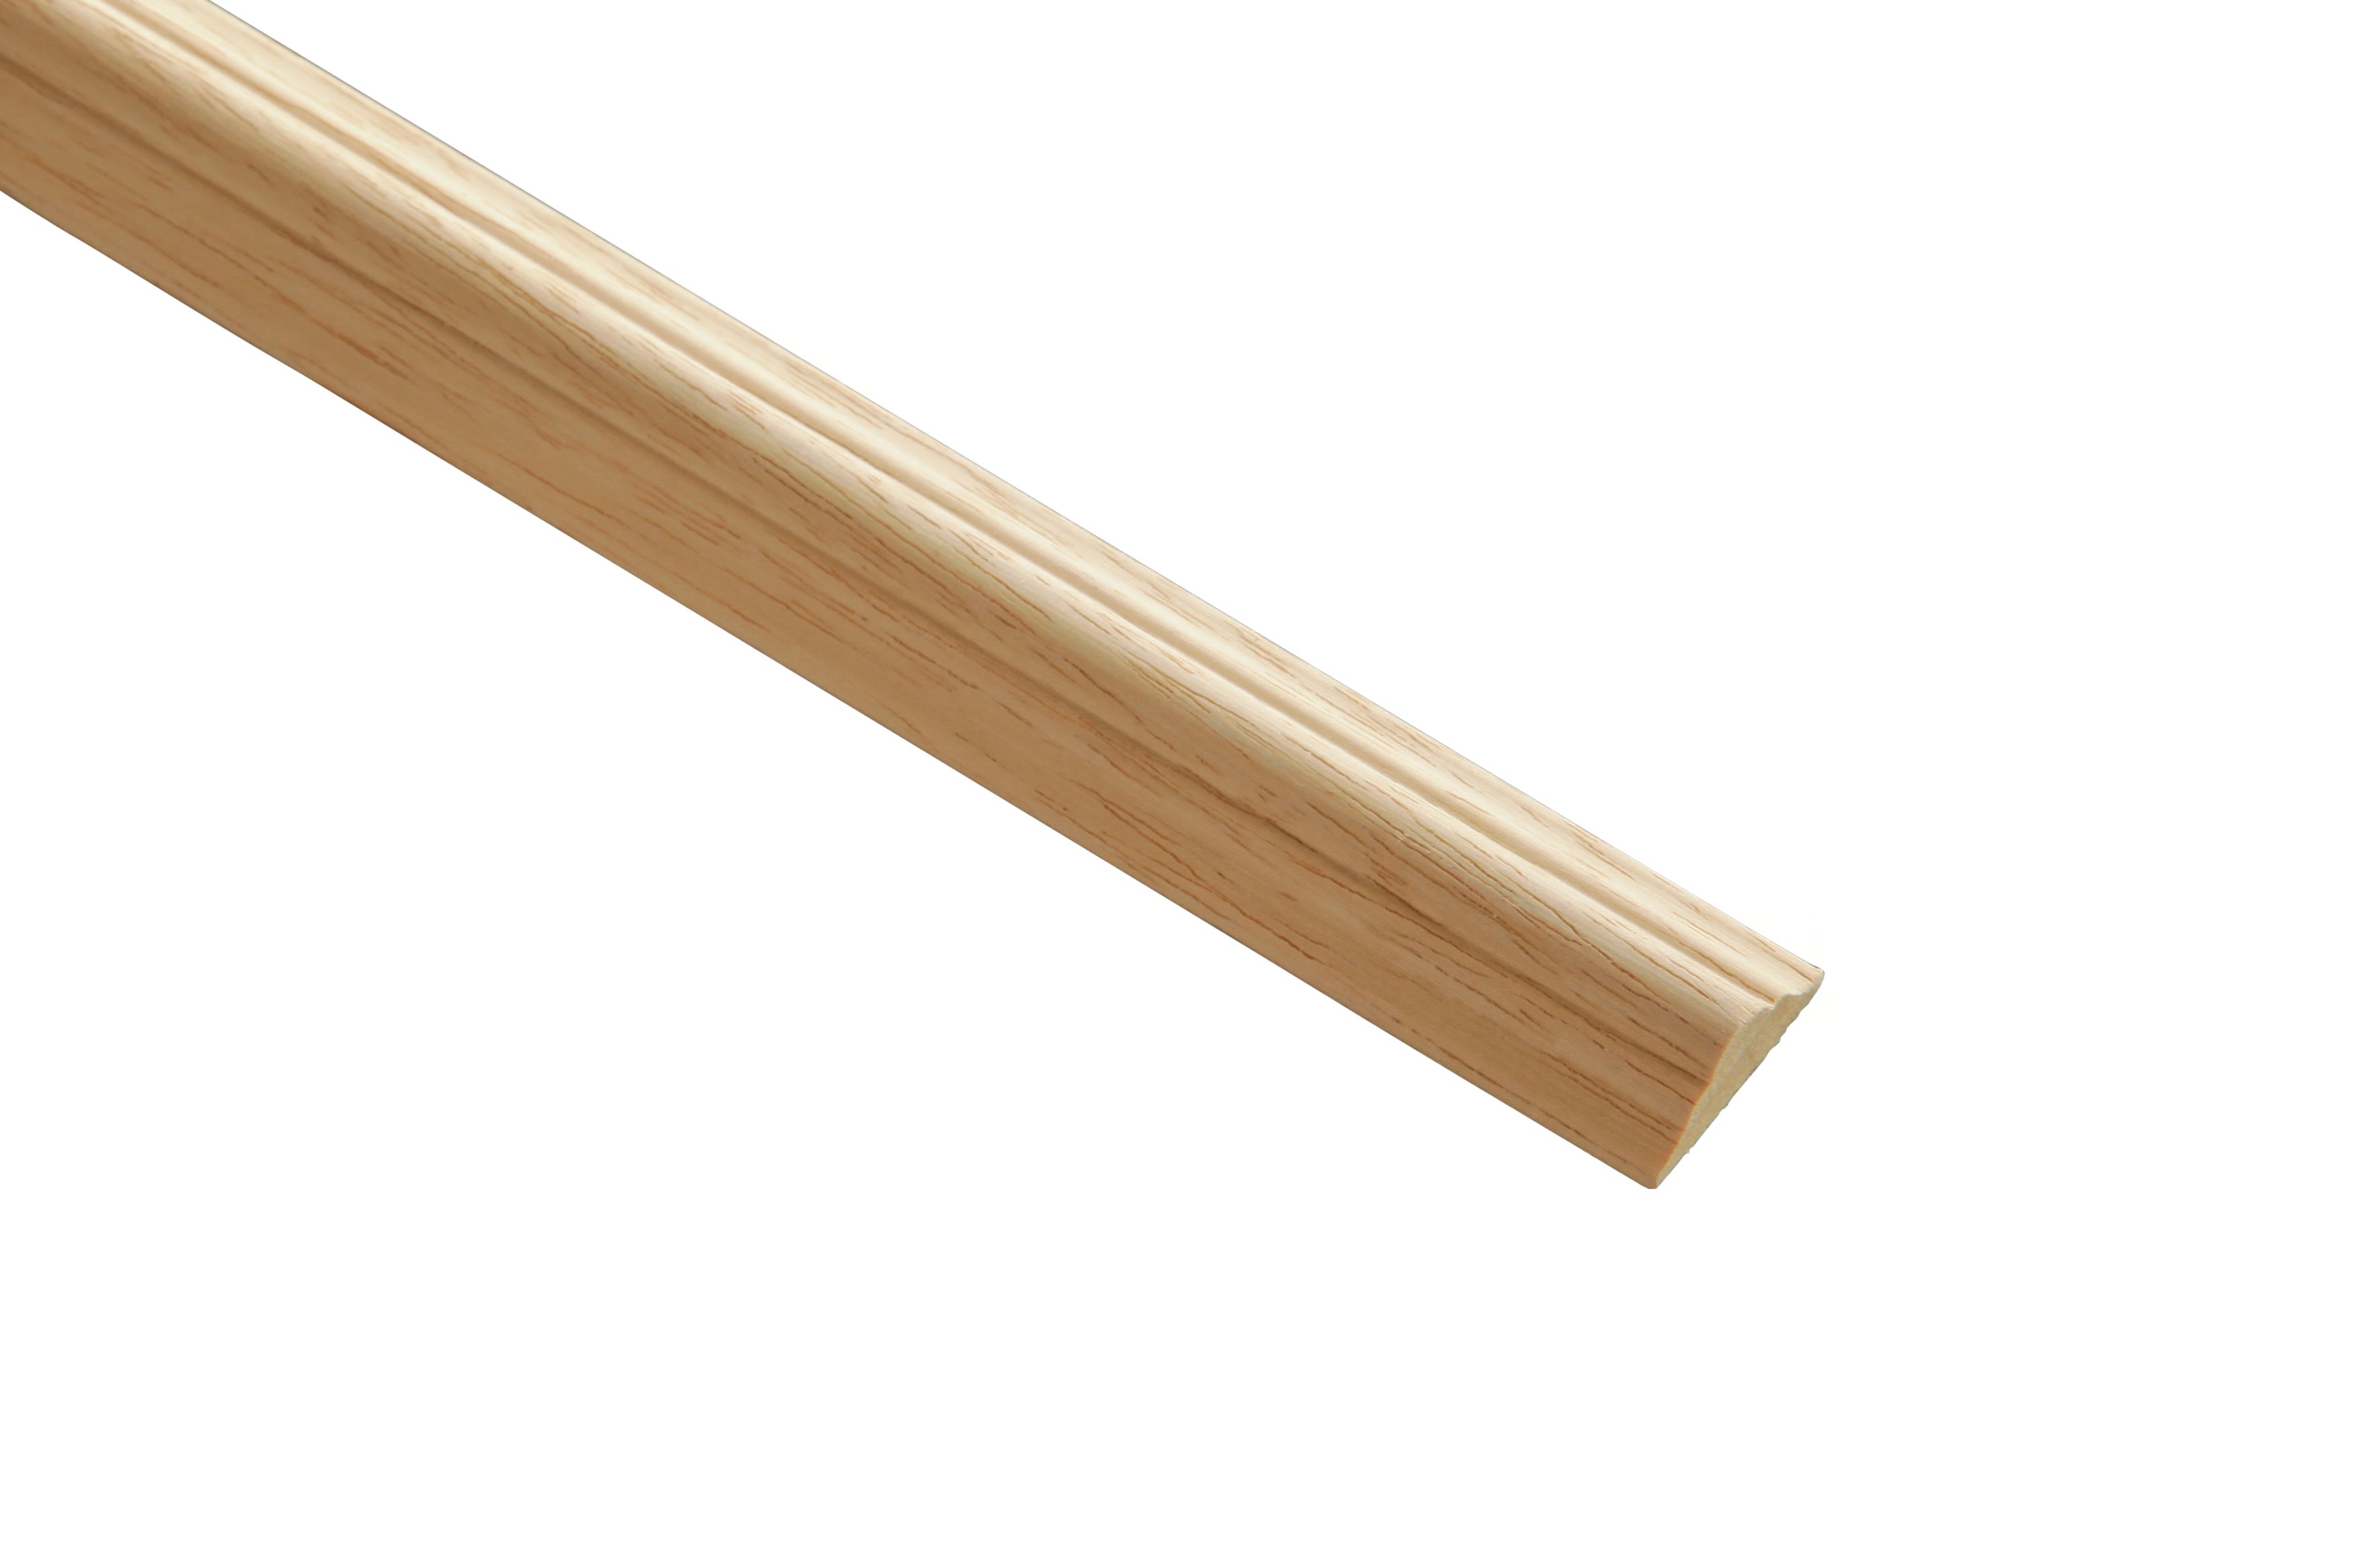 Image of Wickes Light Hardwood Astragal Moulding - 21 x 8 x 2400mm